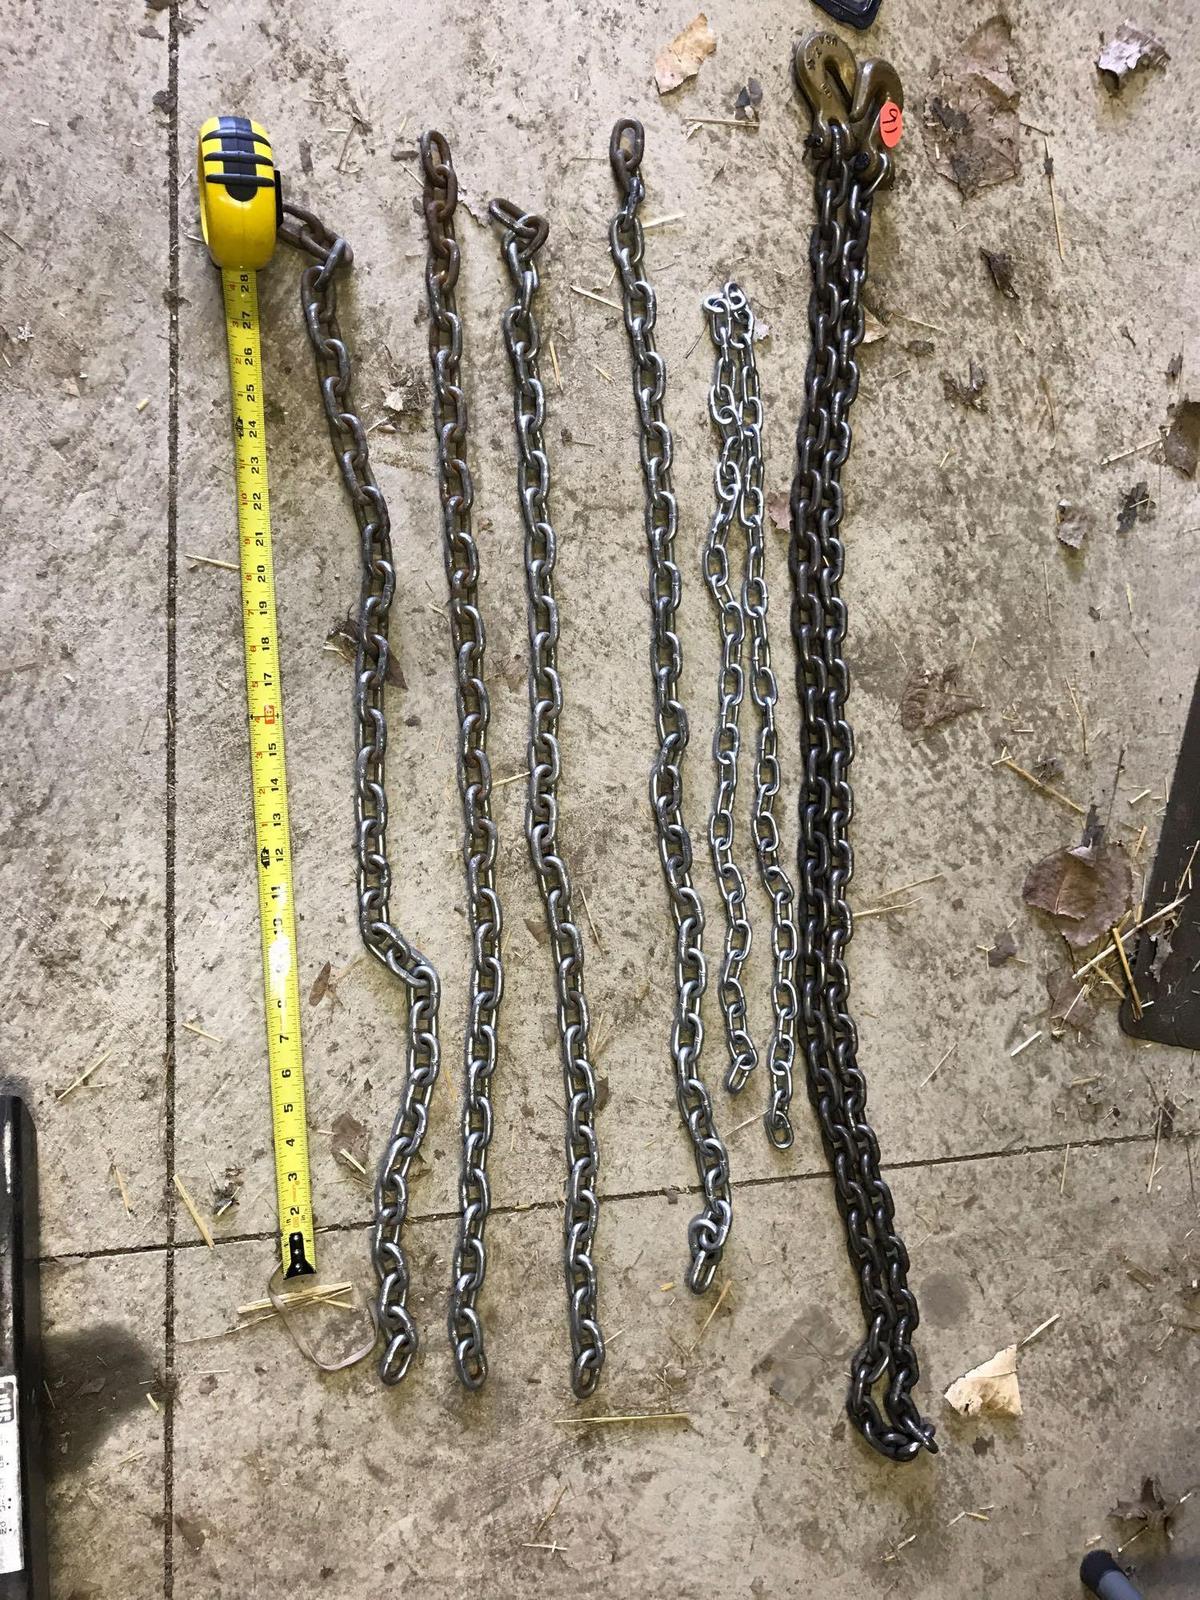 Misc chain, and hooks